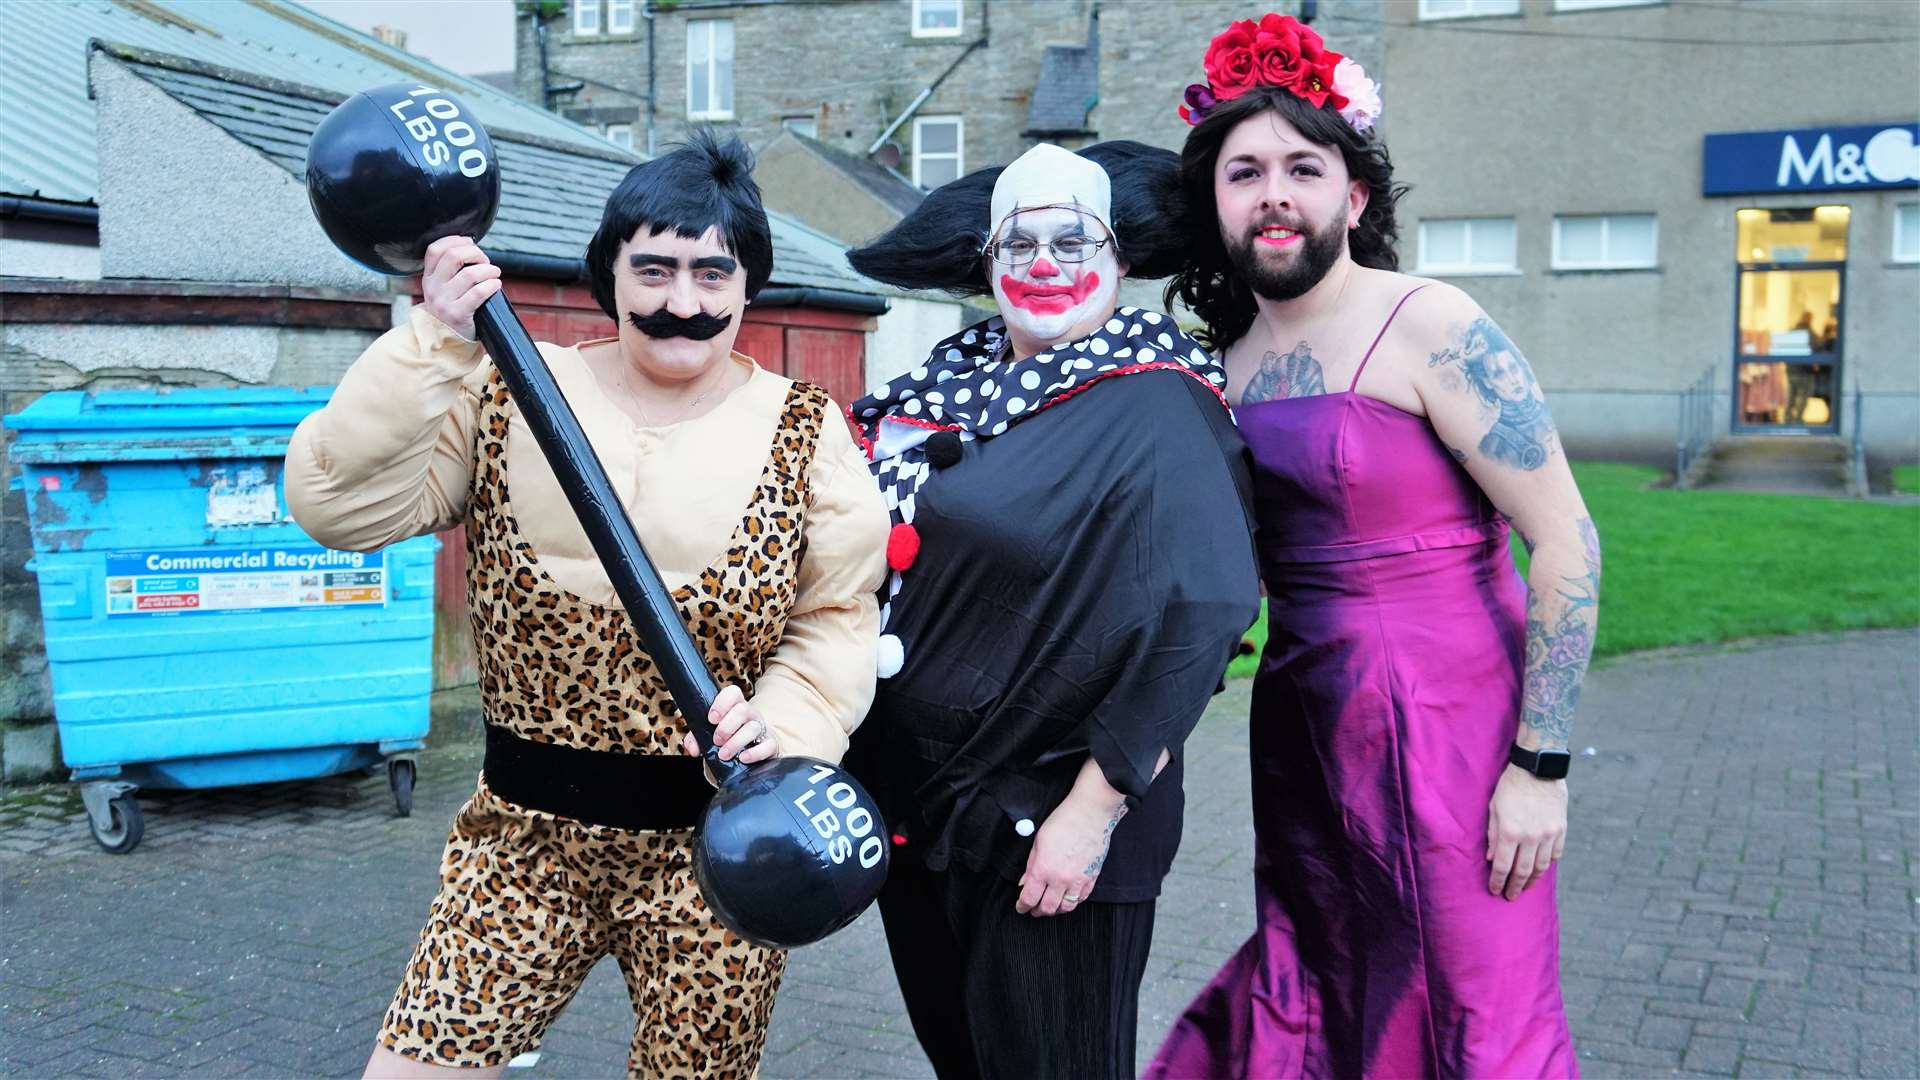 Staff from Jamieson's Bakery won first prize in fancy dress for Thurso's Fun Day. Picture: DGS